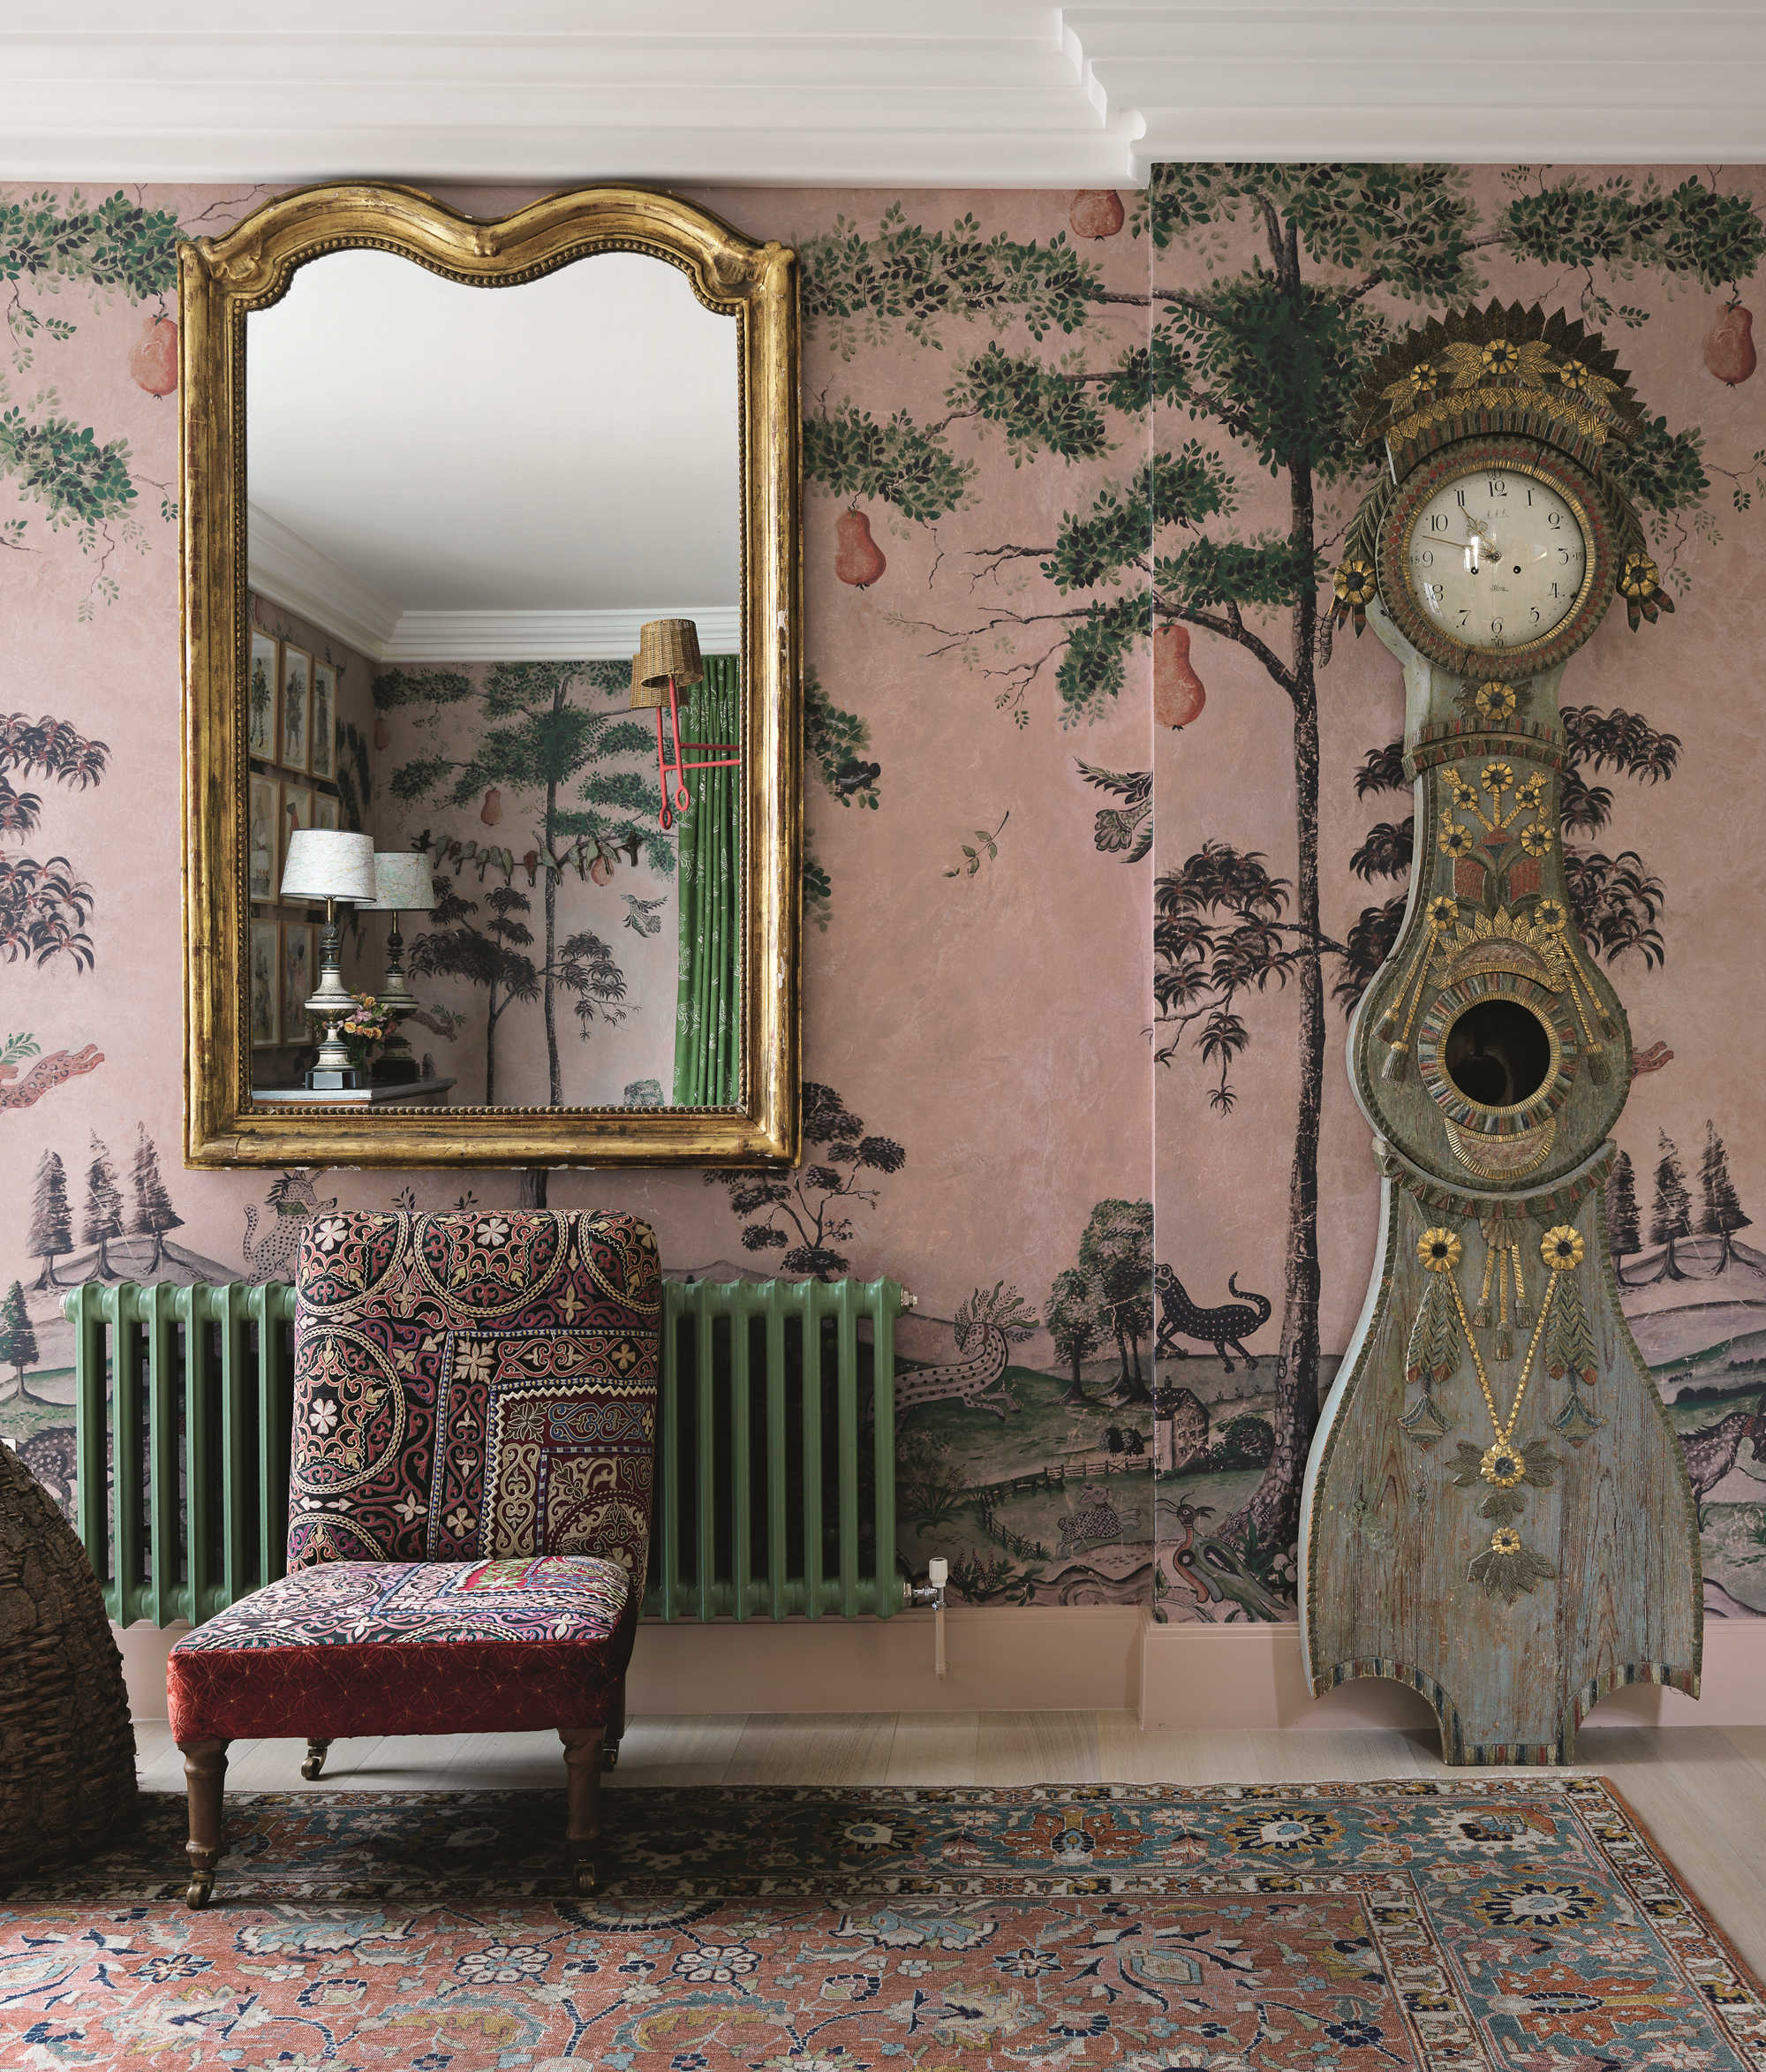 Kit Kemp: Hyde Park Gate, private residence, London, UK, 2020. Photo by Simon Brown, courtesy of Firmdale Hotels 